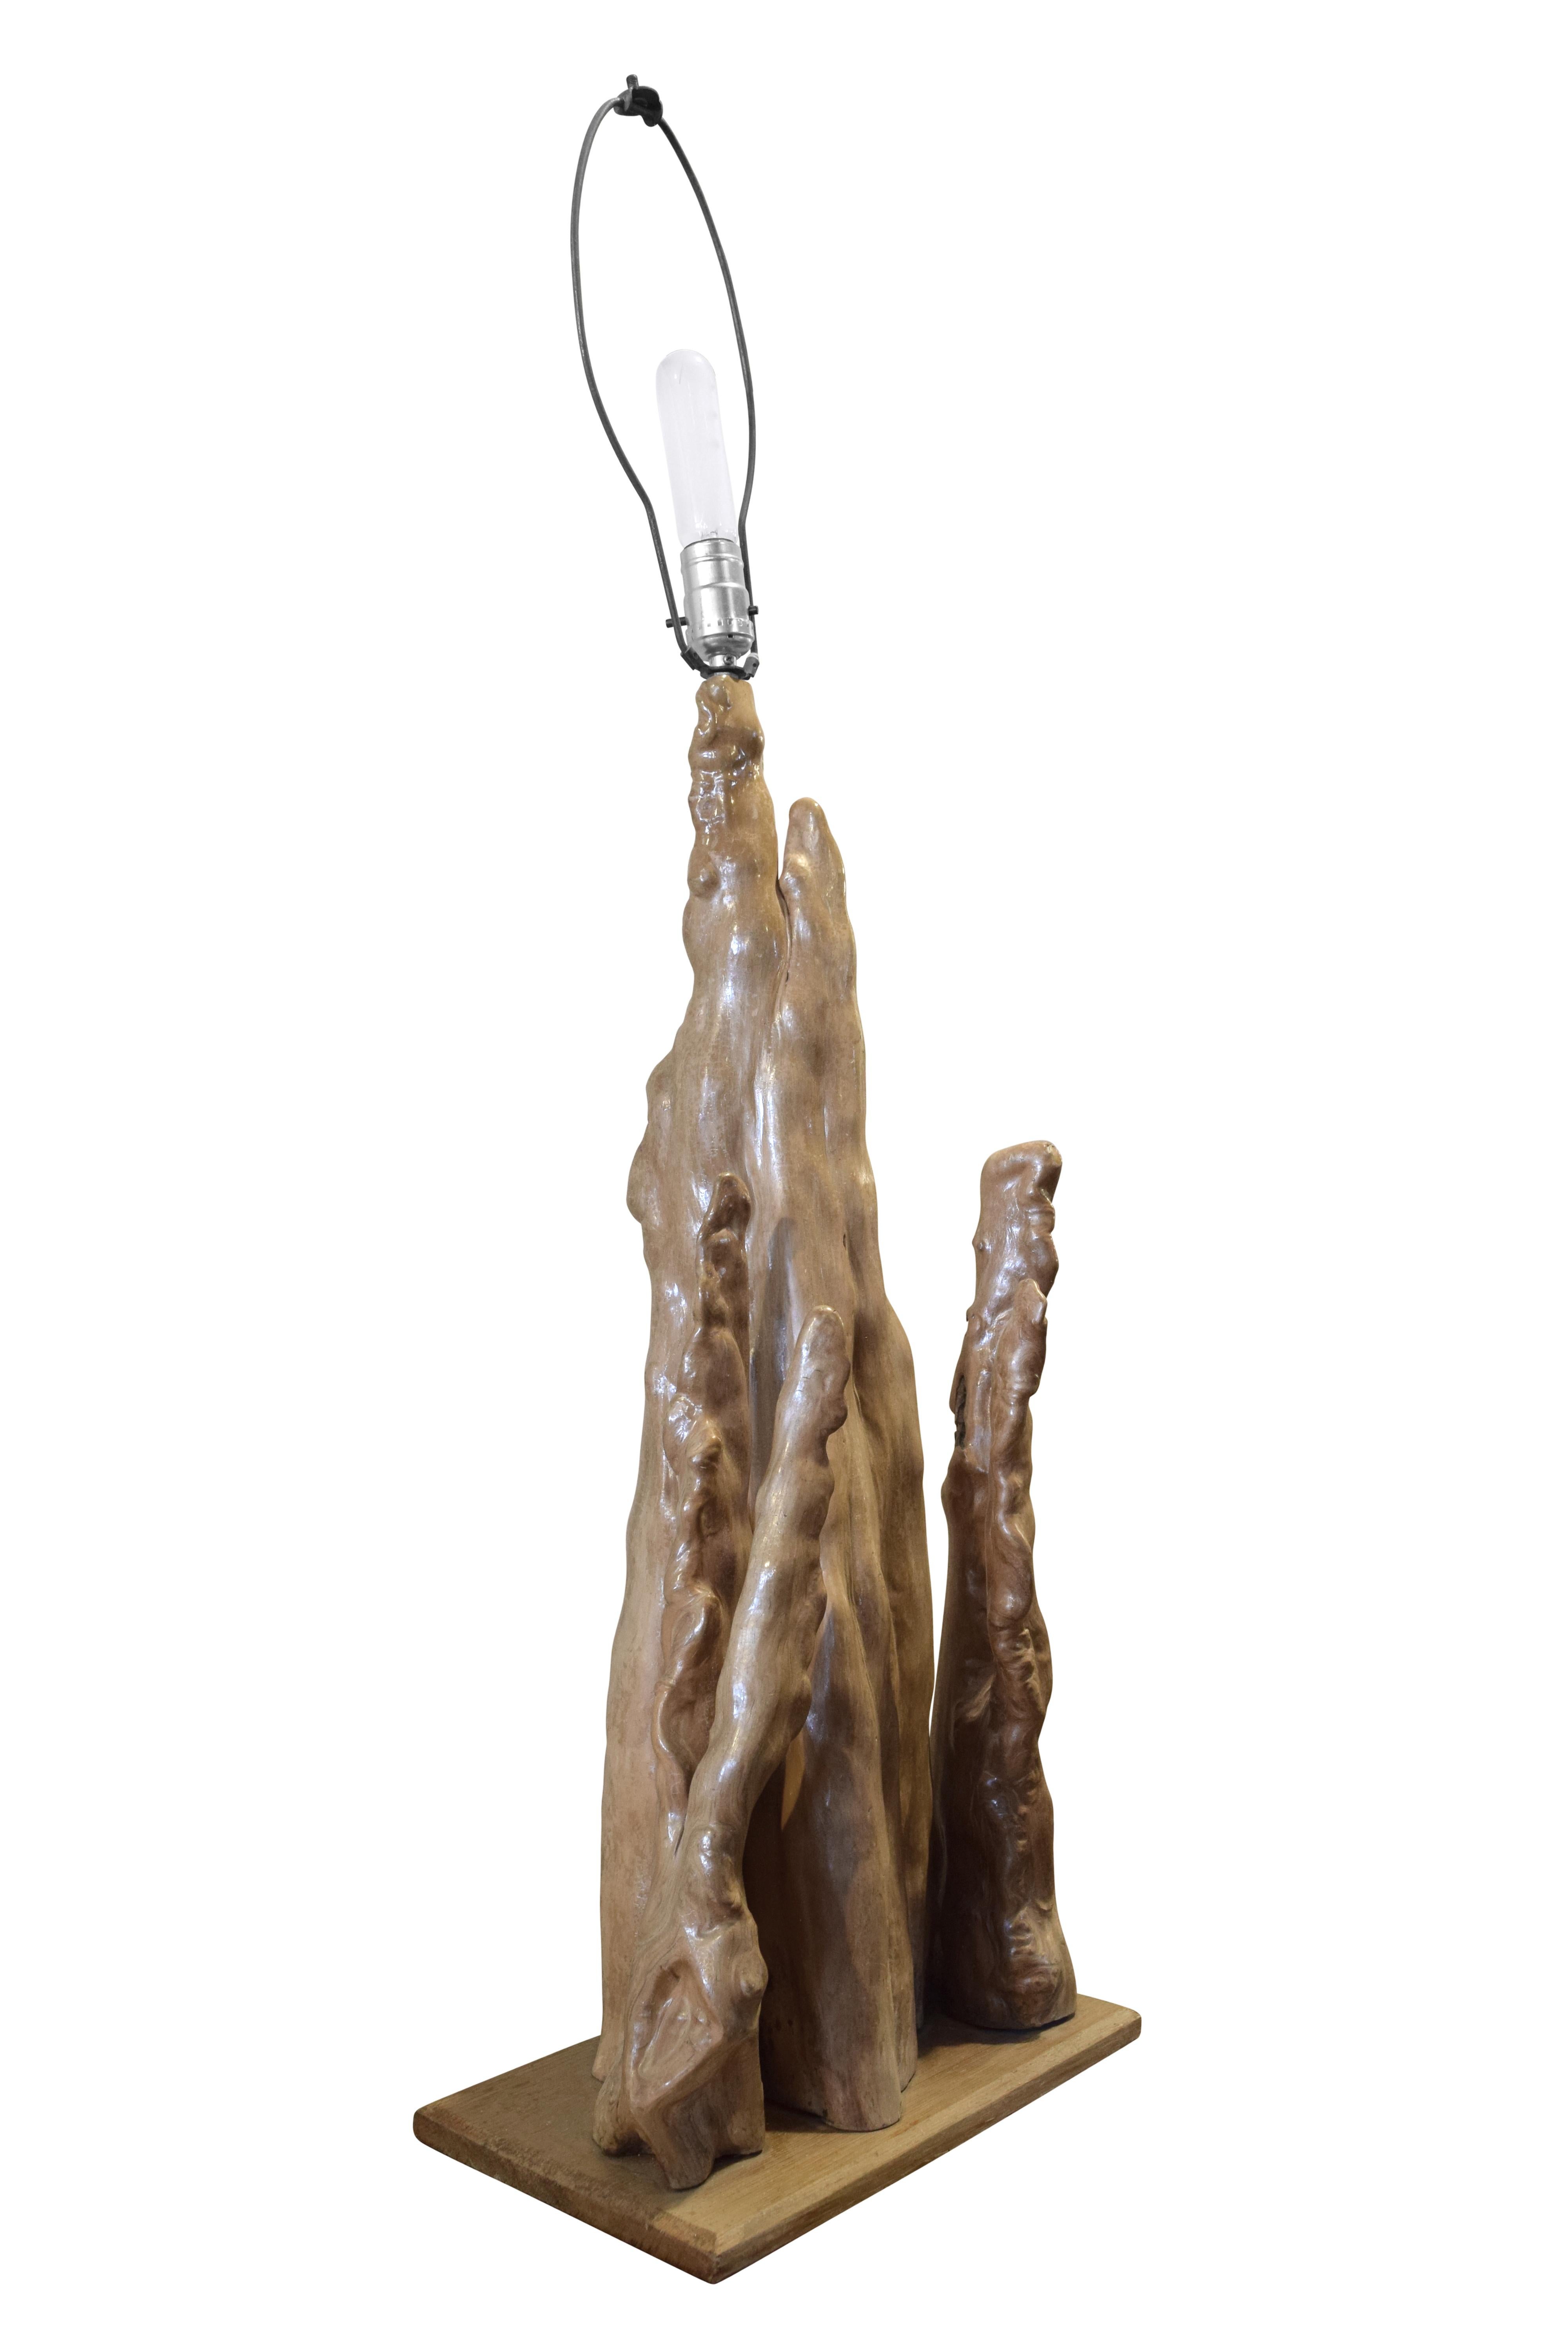 A mid-20th century American cypress burl table lamp with organic form.